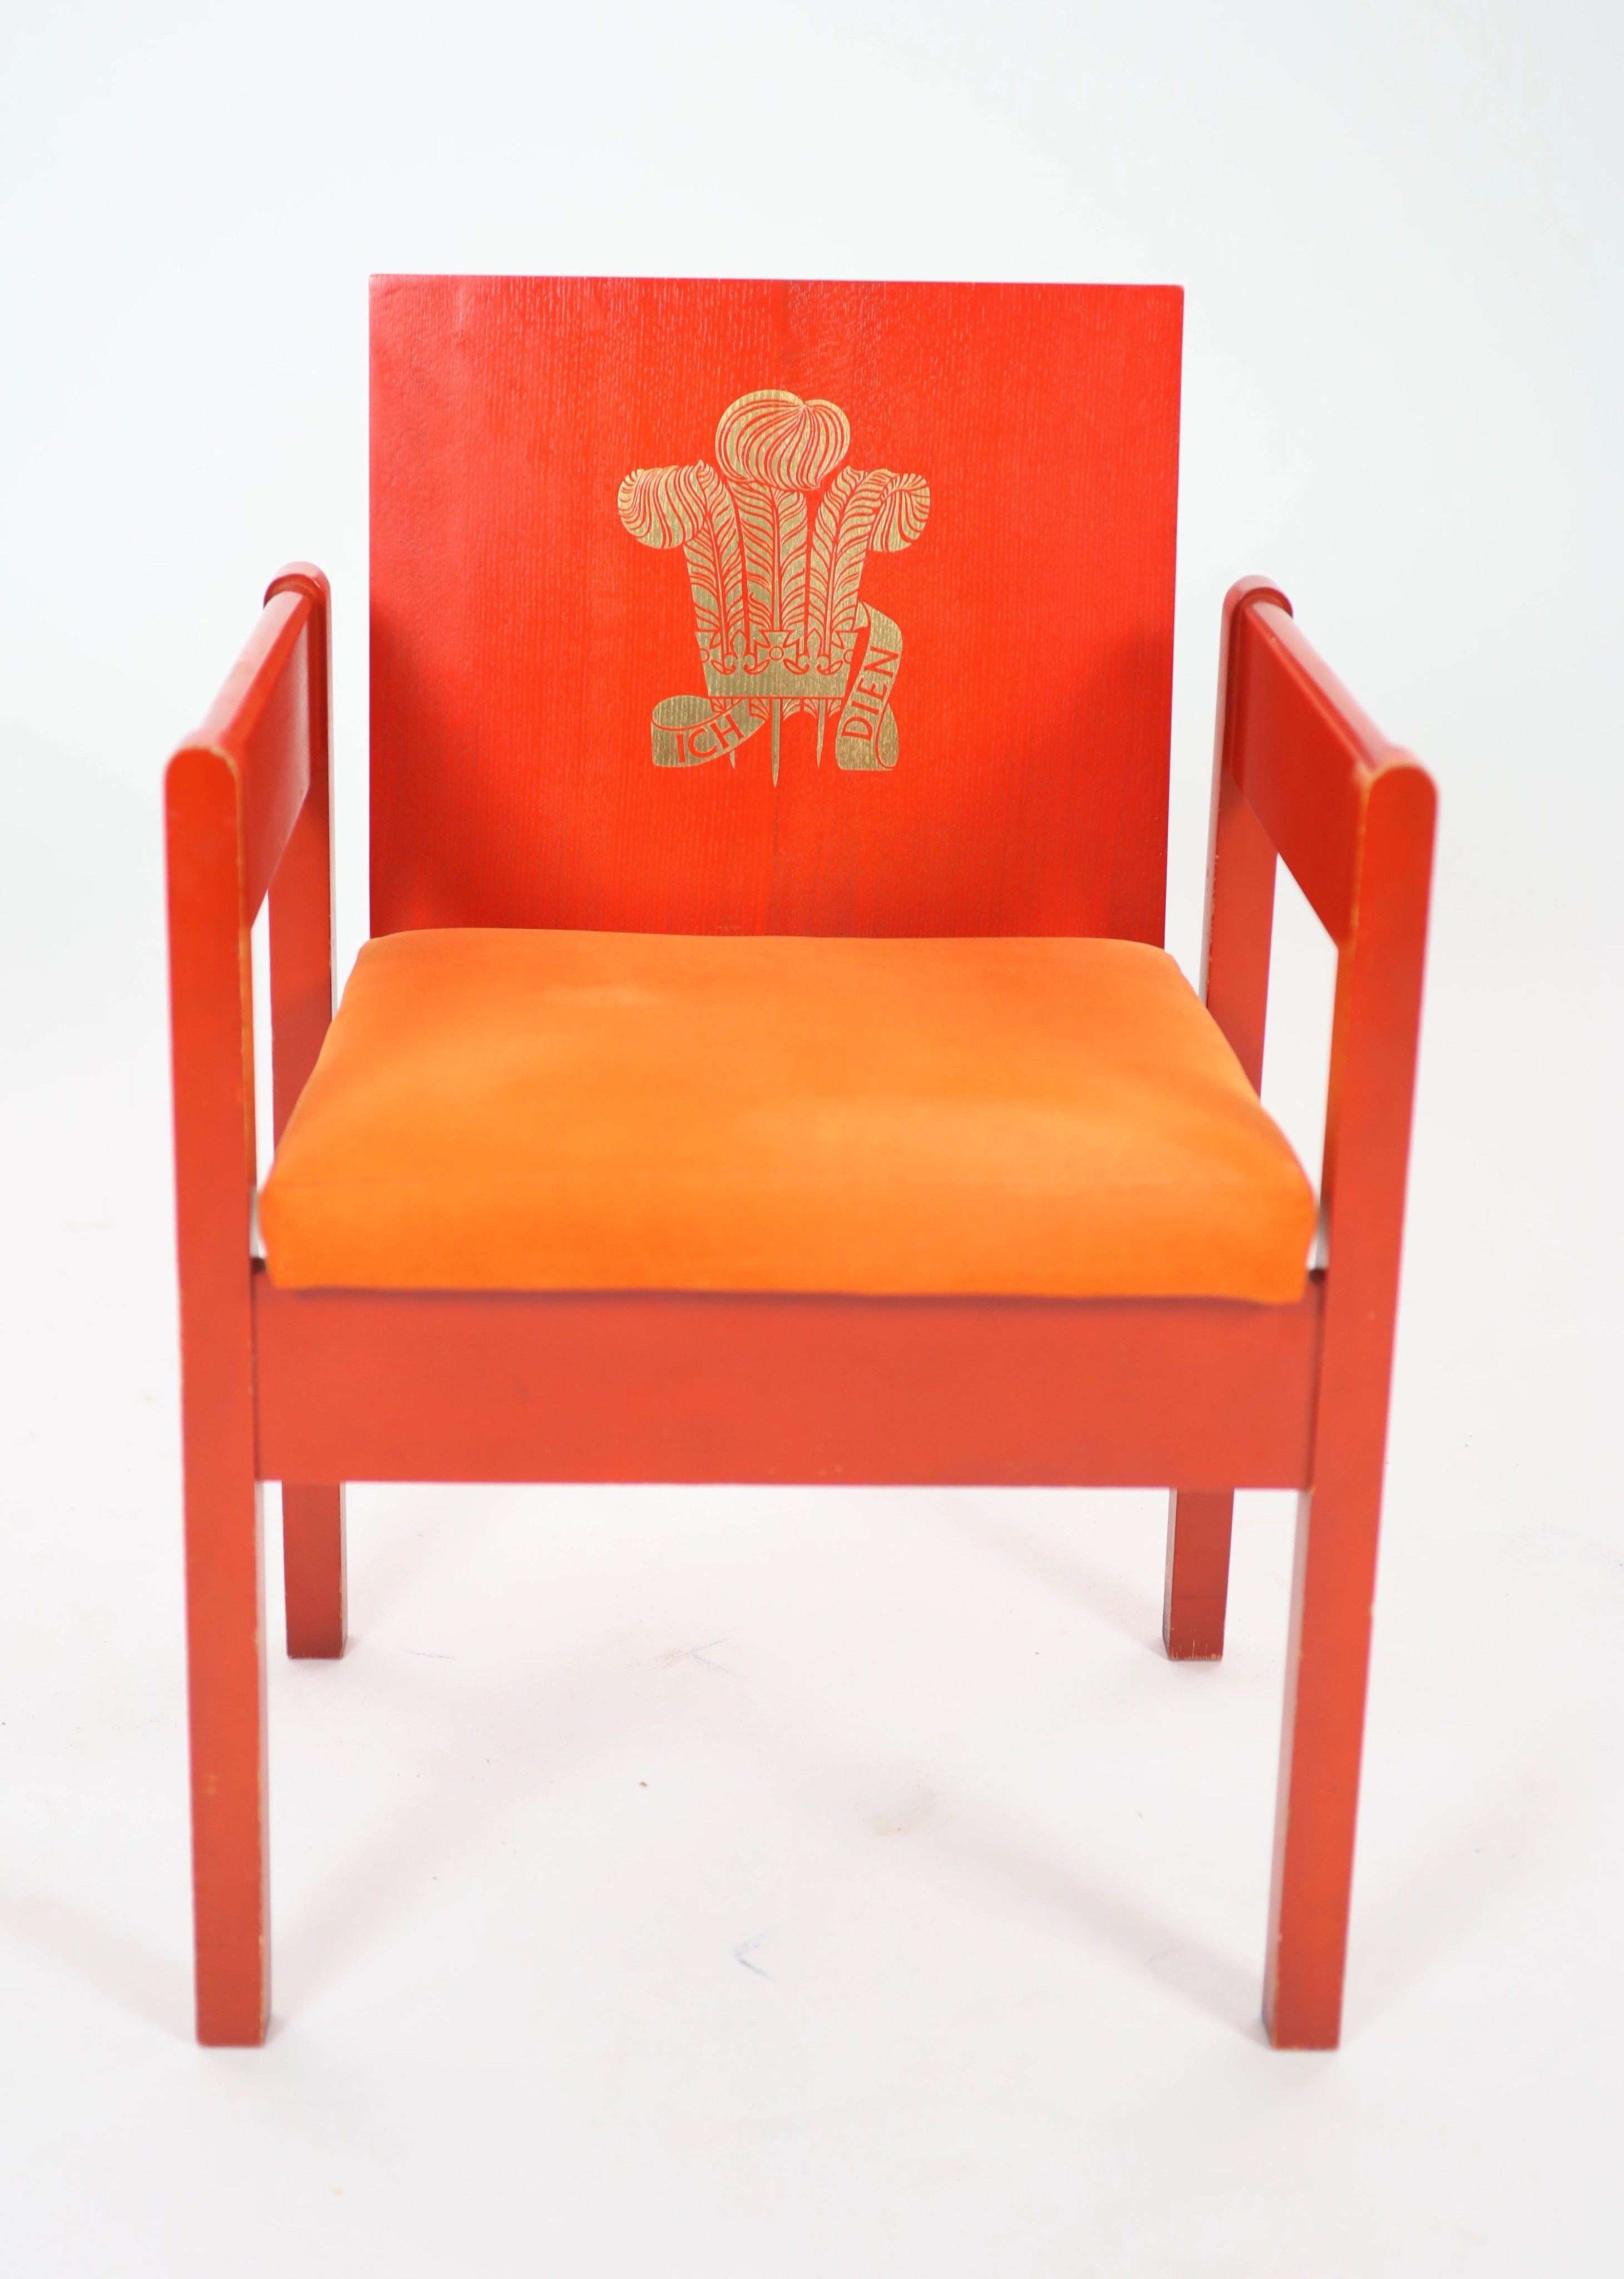 A Prince of Wales investiture chair, 1969 H 79cm.